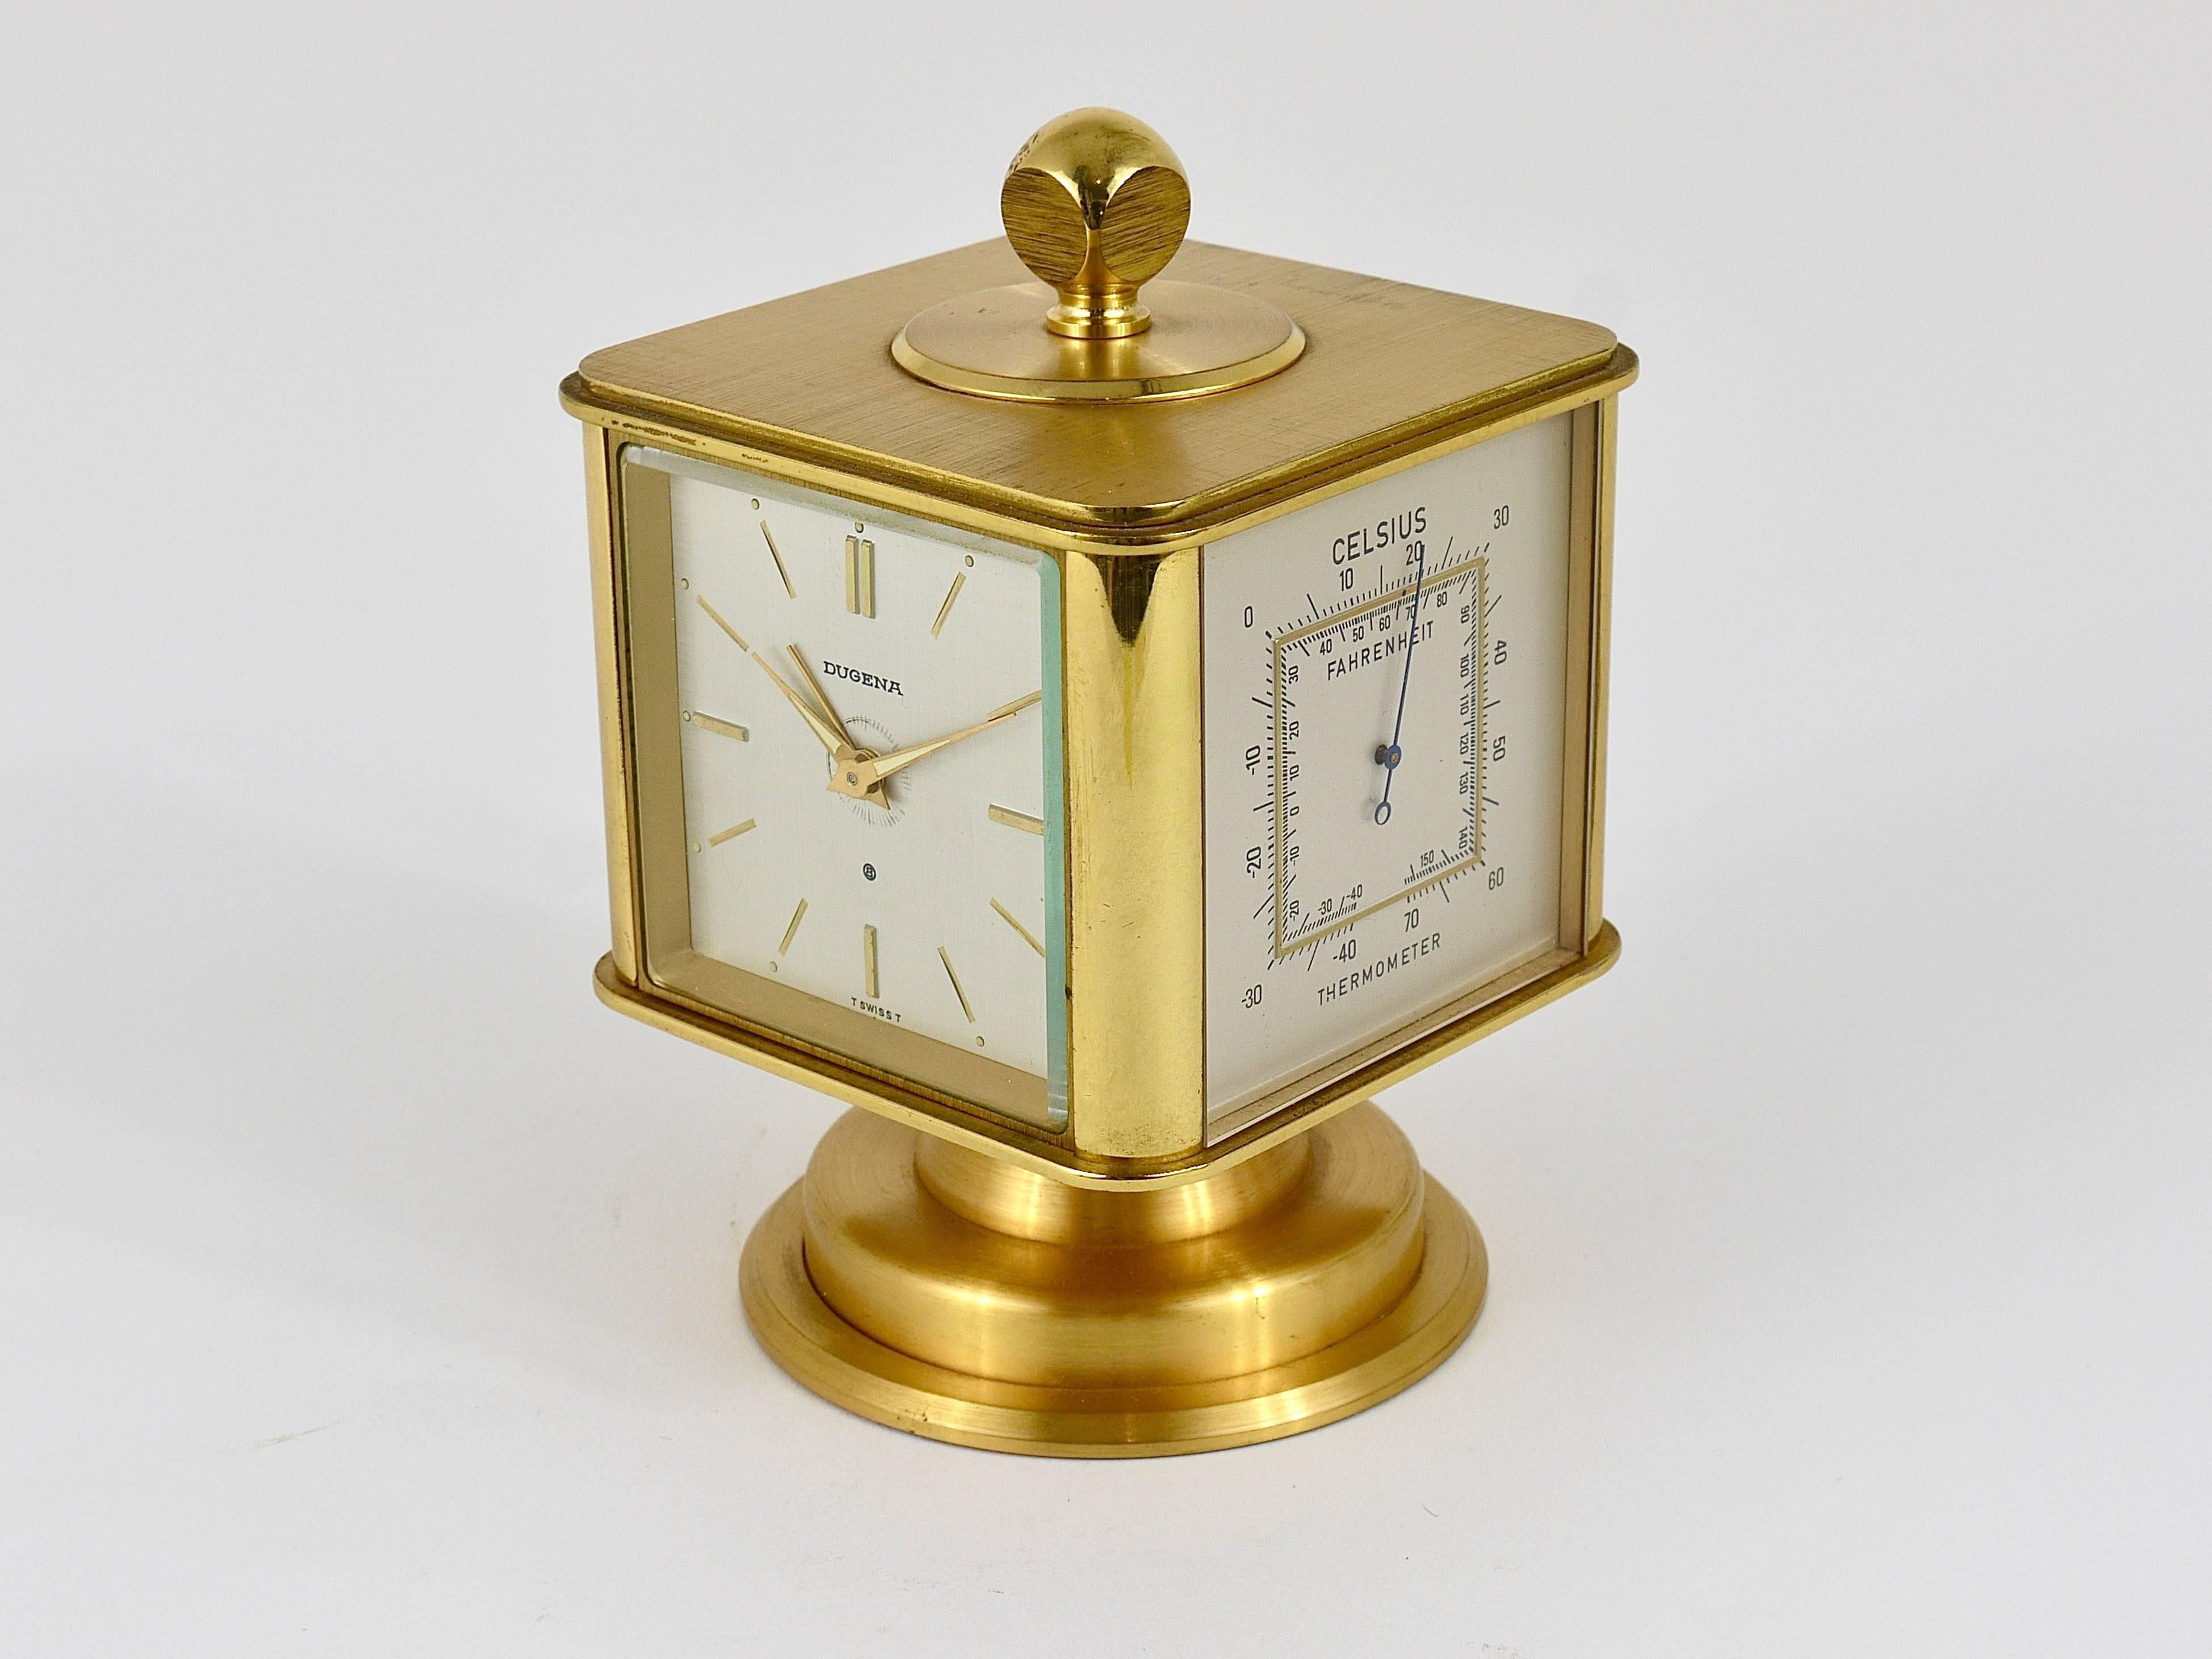 A beautiful cube-shaped brass alarm table clock which combines also an integrated thermometer, hygrometer and barometer. Executed by Deutsche Uhrmacher-Genossenschaft Alpina (DUGENA) in the 1970s. On a rotatable base with a Swiss made manual winding